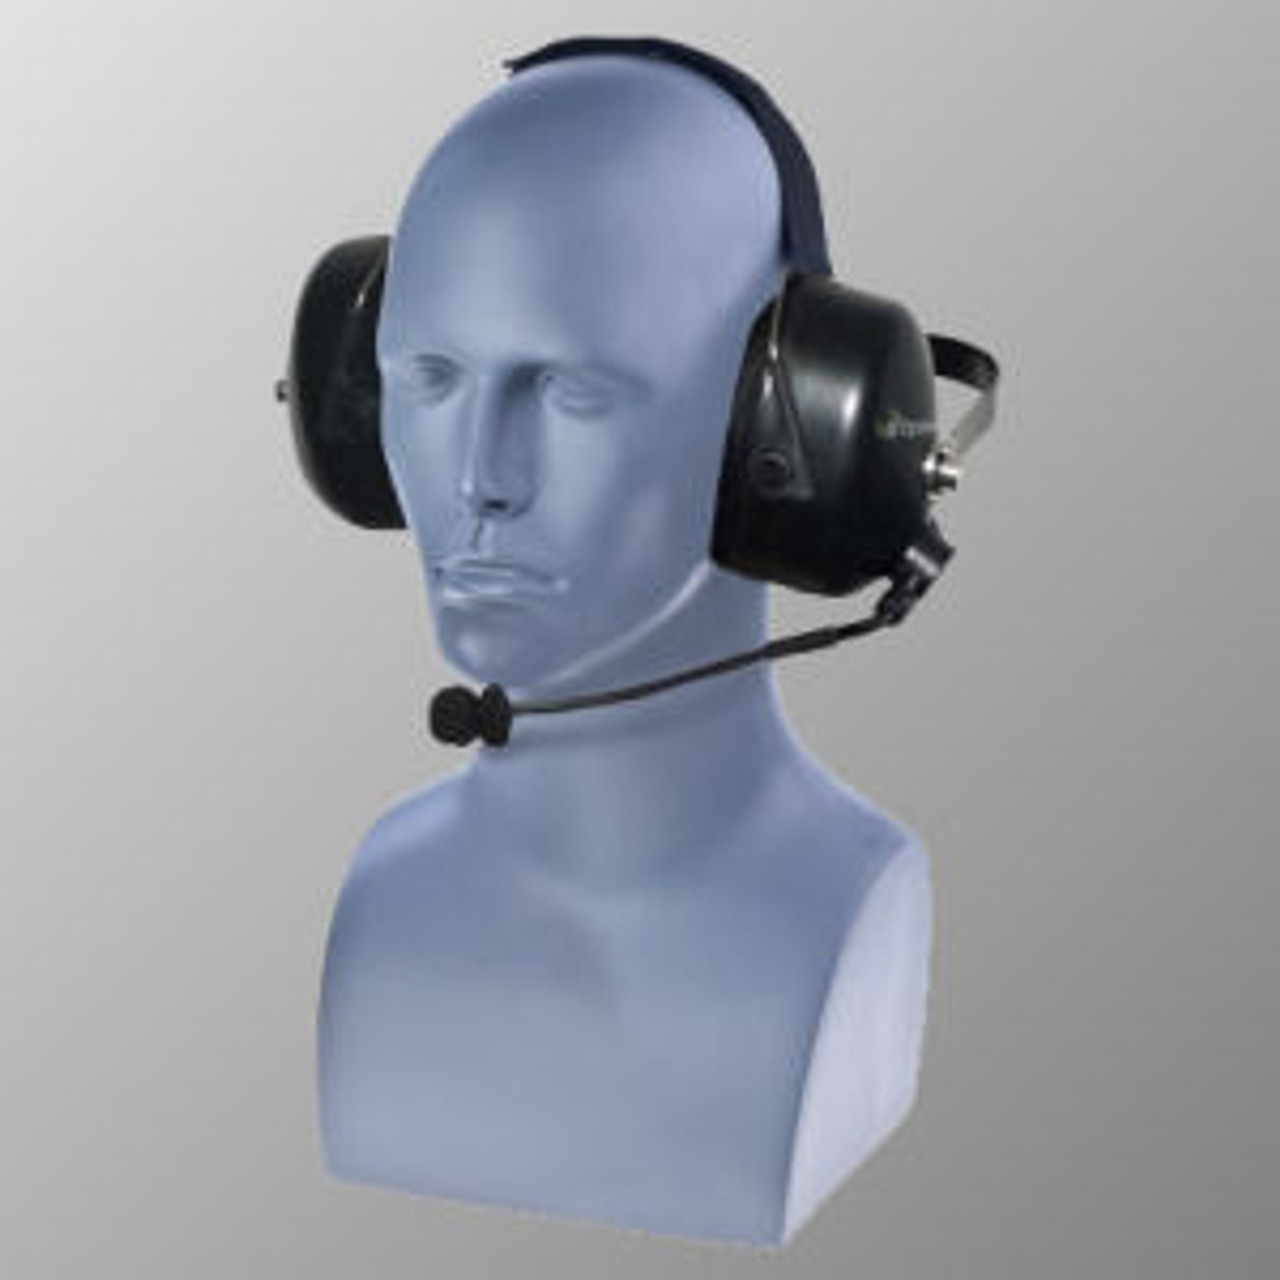 Harris P5570 Noise Canceling Double Muff Behind The Head Headset